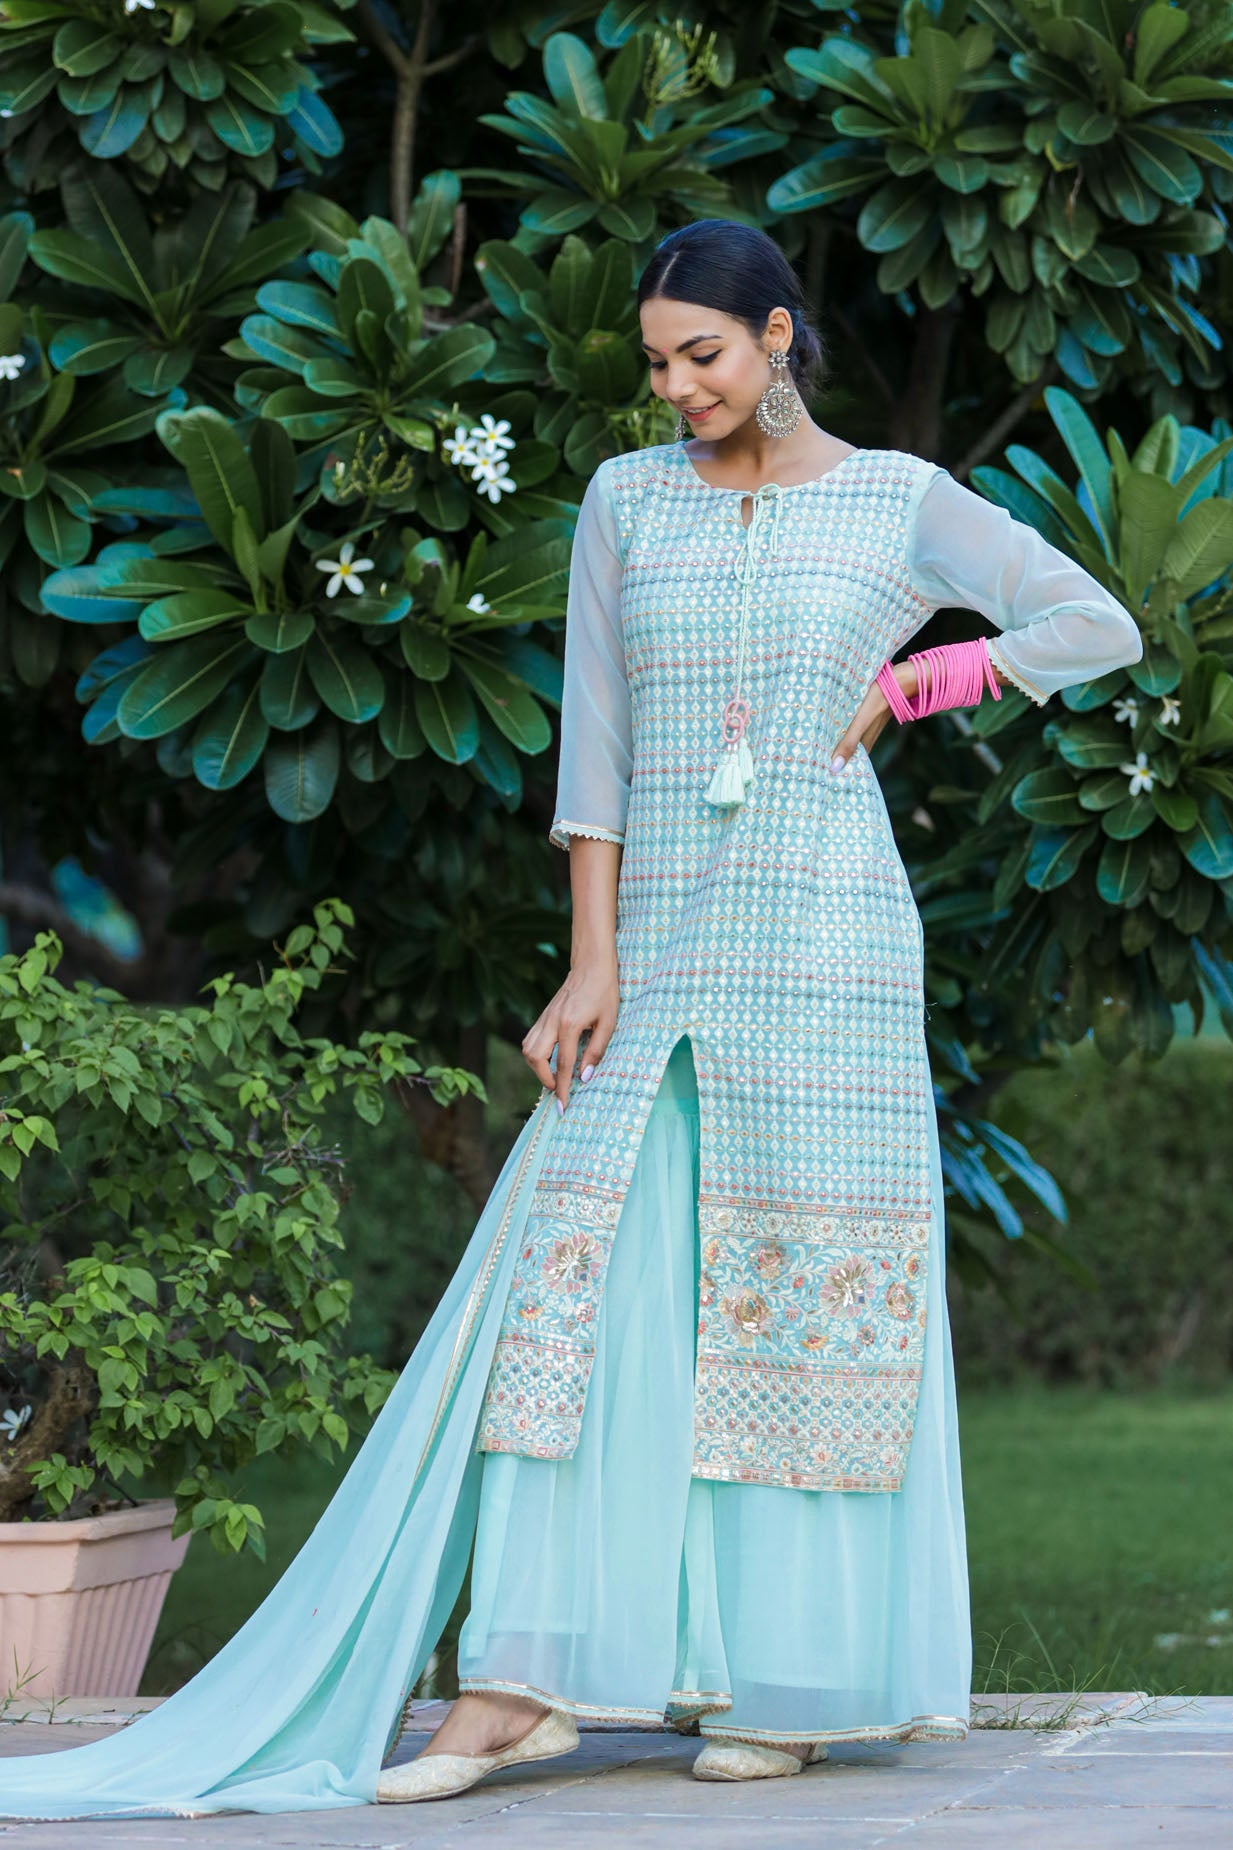 The Blue Georgette